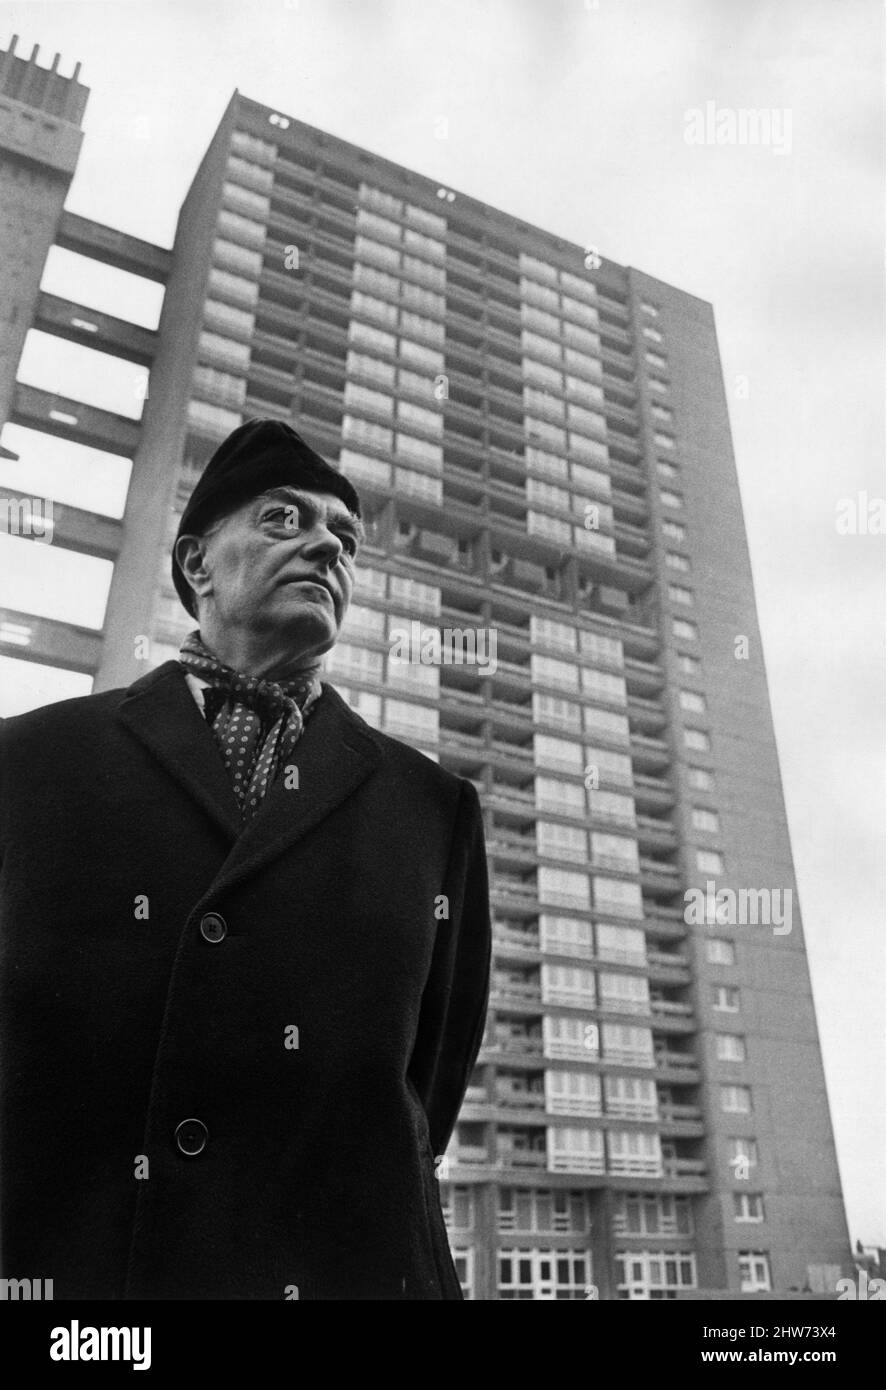 Mr Erno Goldfinger, Hungarian-born architect, moves into a block of GLC flats he designed at the northern approach to Blackwall Tunnel, firstly as a social experiment and to help improve his future designs. 22nd February 1968. Stock Photo